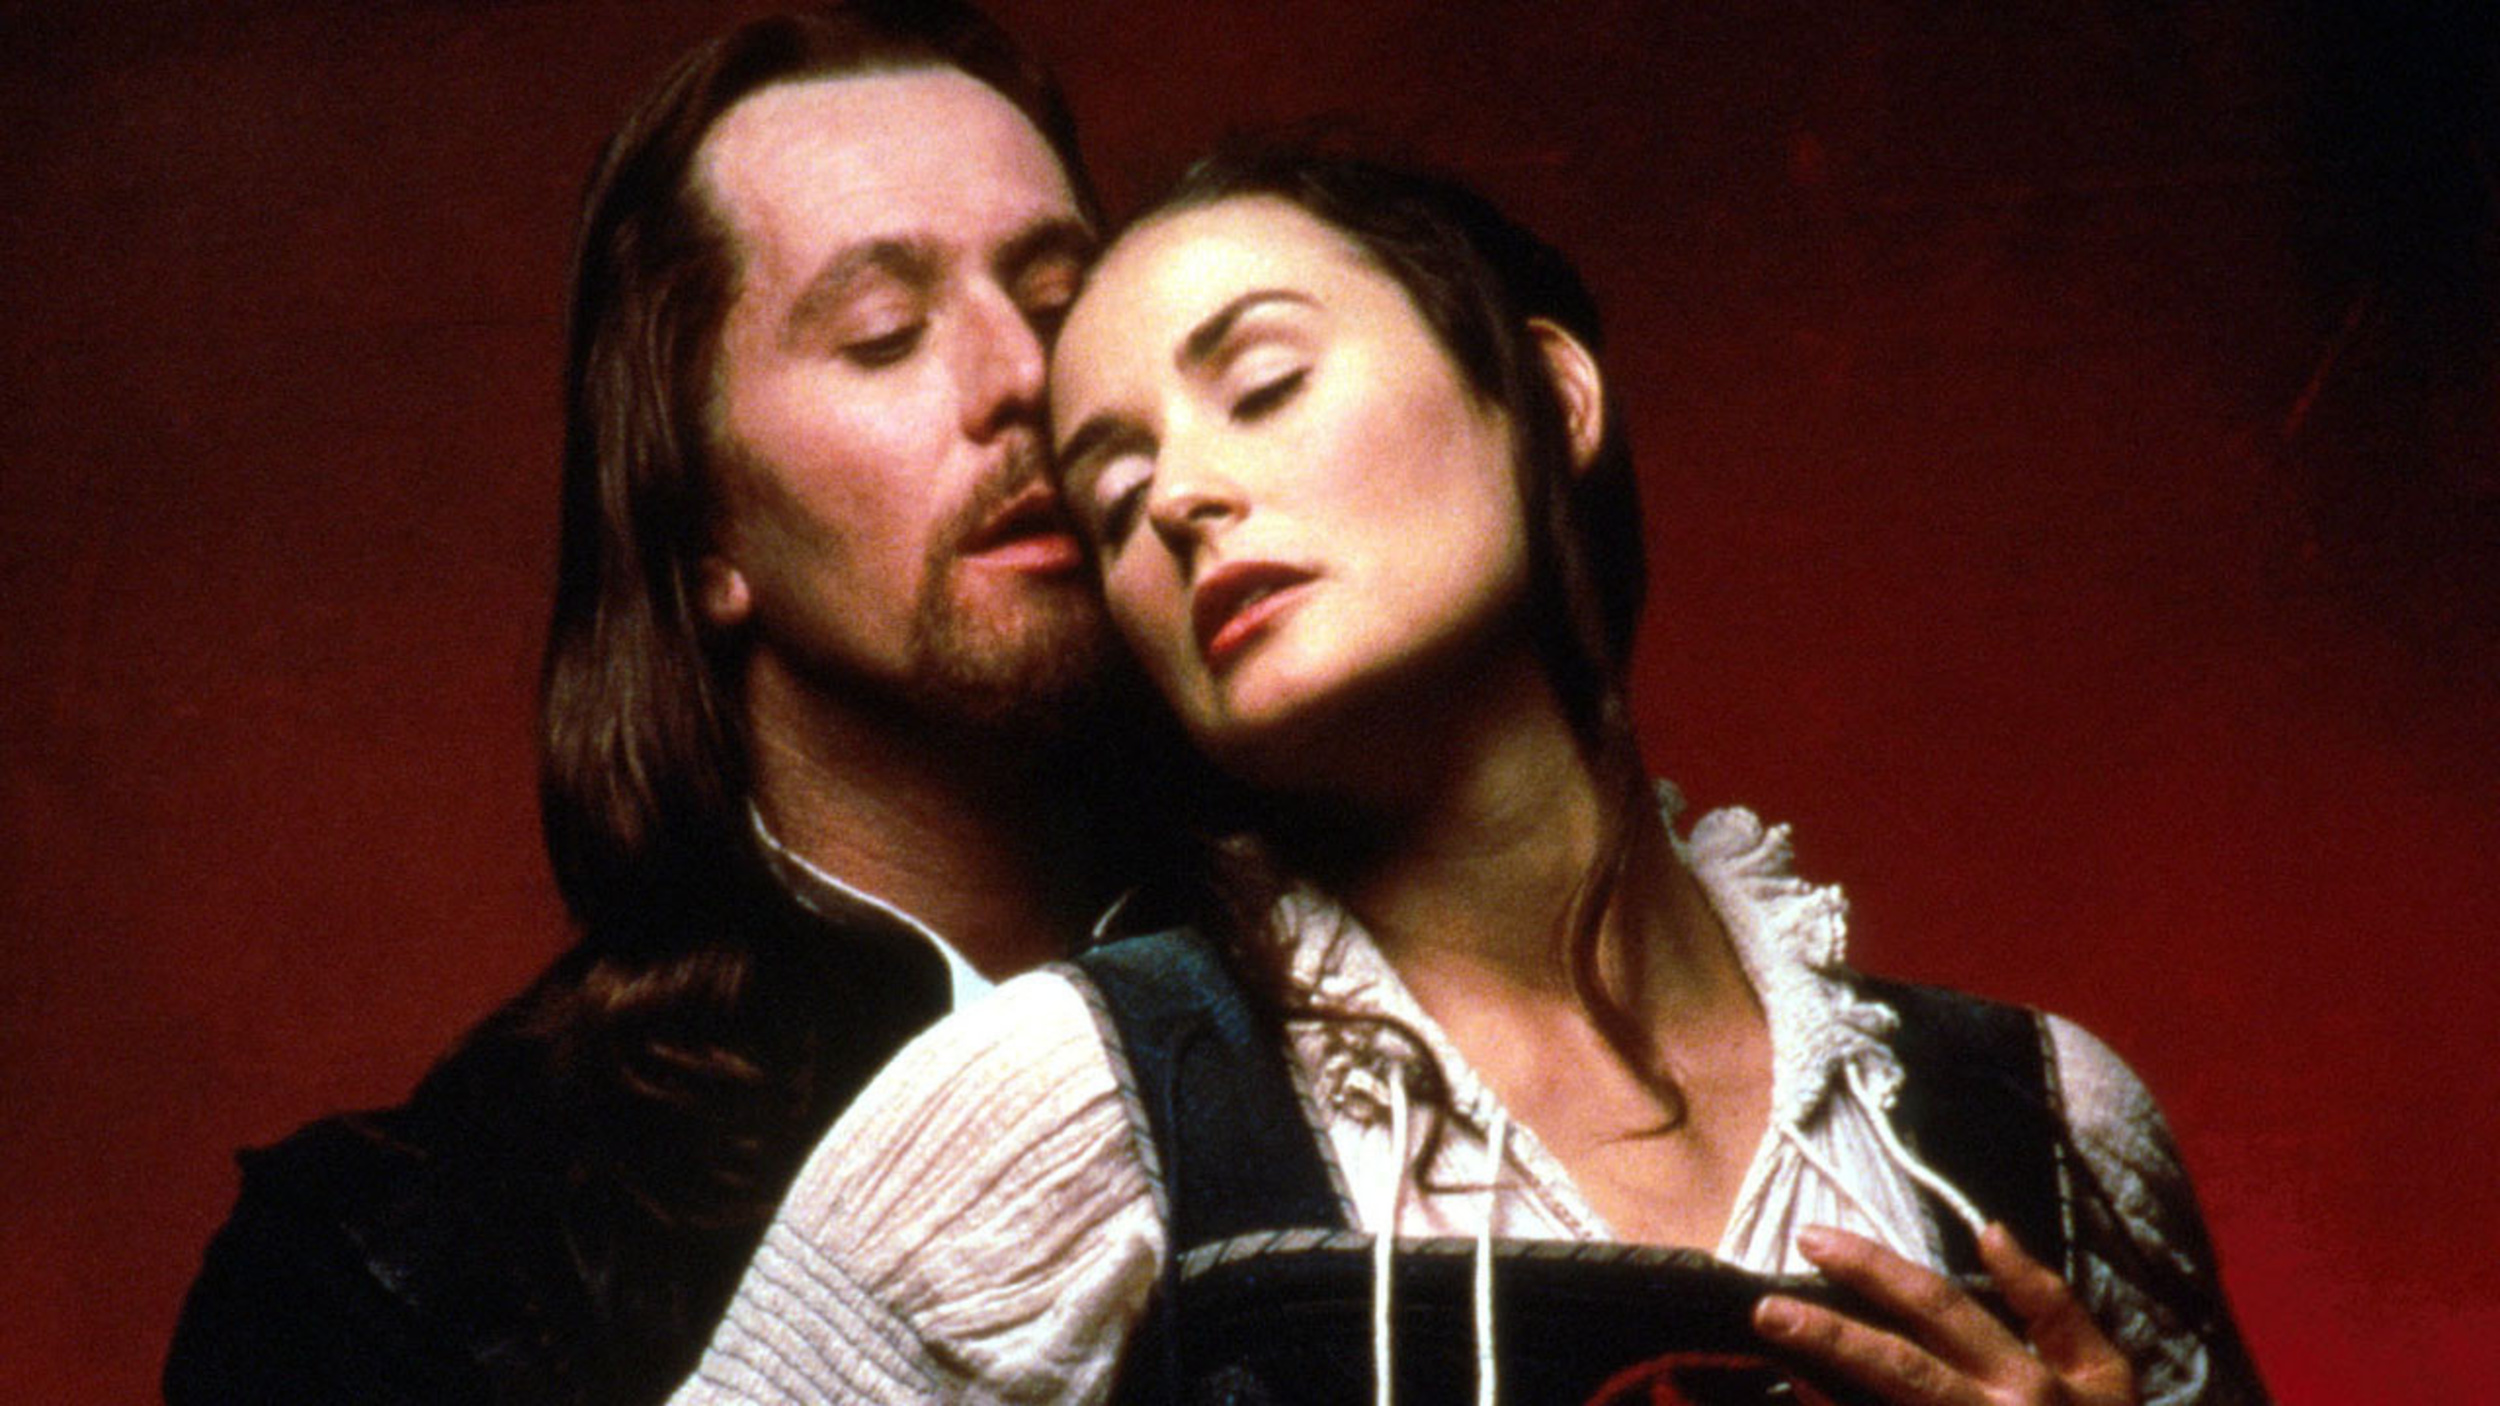 <p>When you are adapting an American classic, you have to tread carefully. Turning “The Scarlet Letter” into something of an erotic thriller starring Demi Moore and Gary Oldman feels like a bit of a misstep. Roger Ebert famously loathed this movie, but at least he saw it. The film, which was nominated for seven Razzies, barely made more than $10 million at the box office.</p><p><a href='https://www.msn.com/en-us/community/channel/vid-cj9pqbr0vn9in2b6ddcd8sfgpfq6x6utp44fssrv6mc2gtybw0us'>Follow us on MSN to see more of our exclusive entertainment content.</a></p>